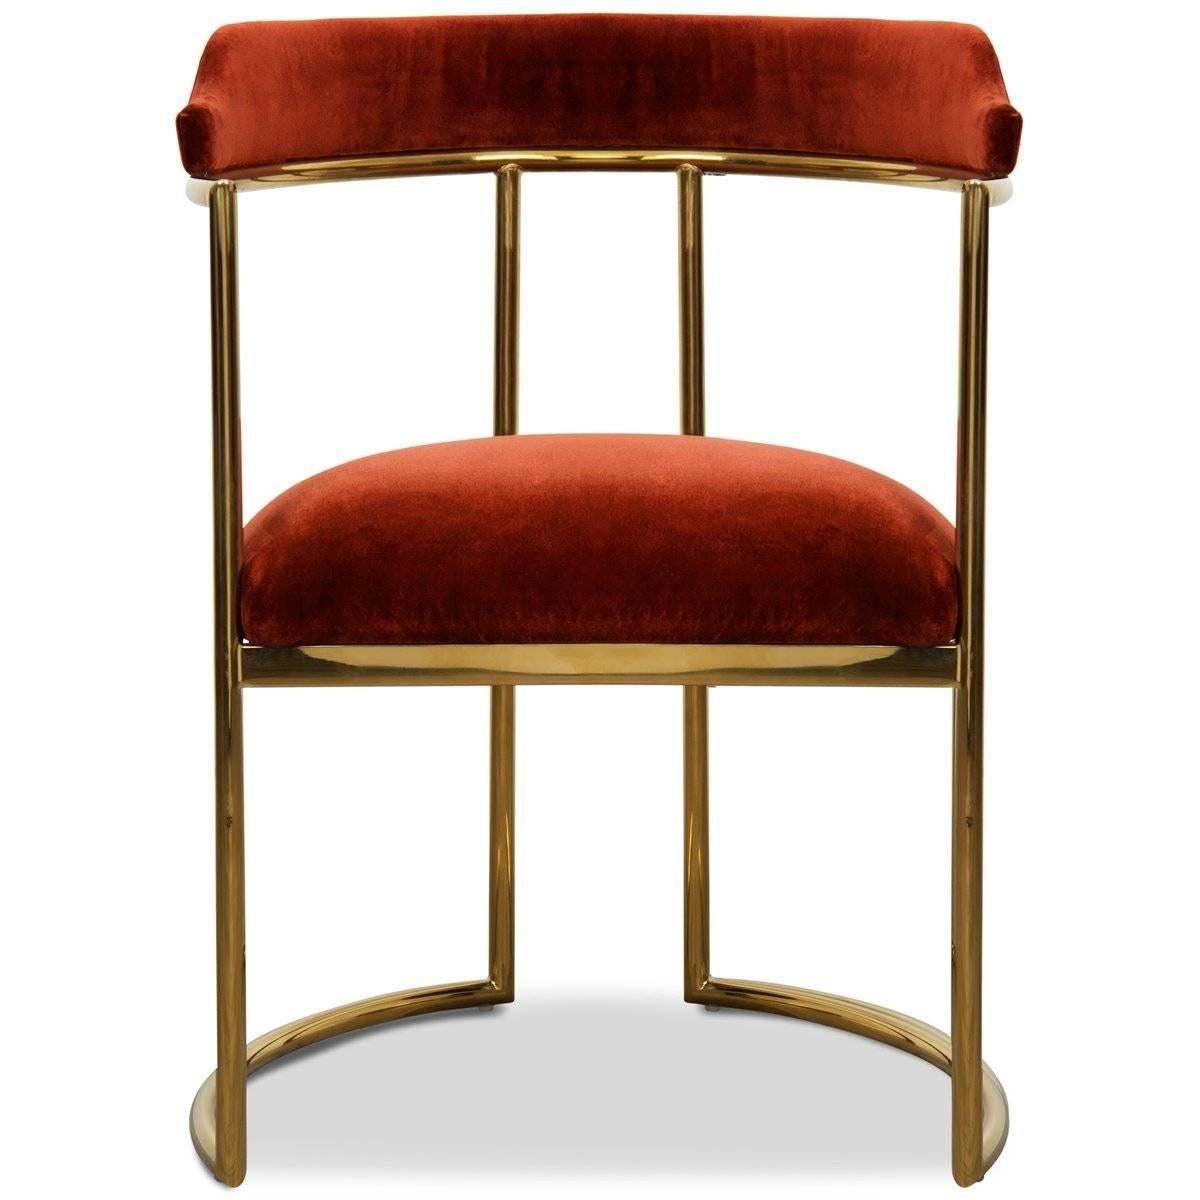 Meet the Acapulco 2 dining chair, the newest version of the popular Acapulco dining chair. As the perfect accent for your modern dining room, the Acapulco 2 is upholstered in your choice of colored velvet with beautifully curved brass legs and a